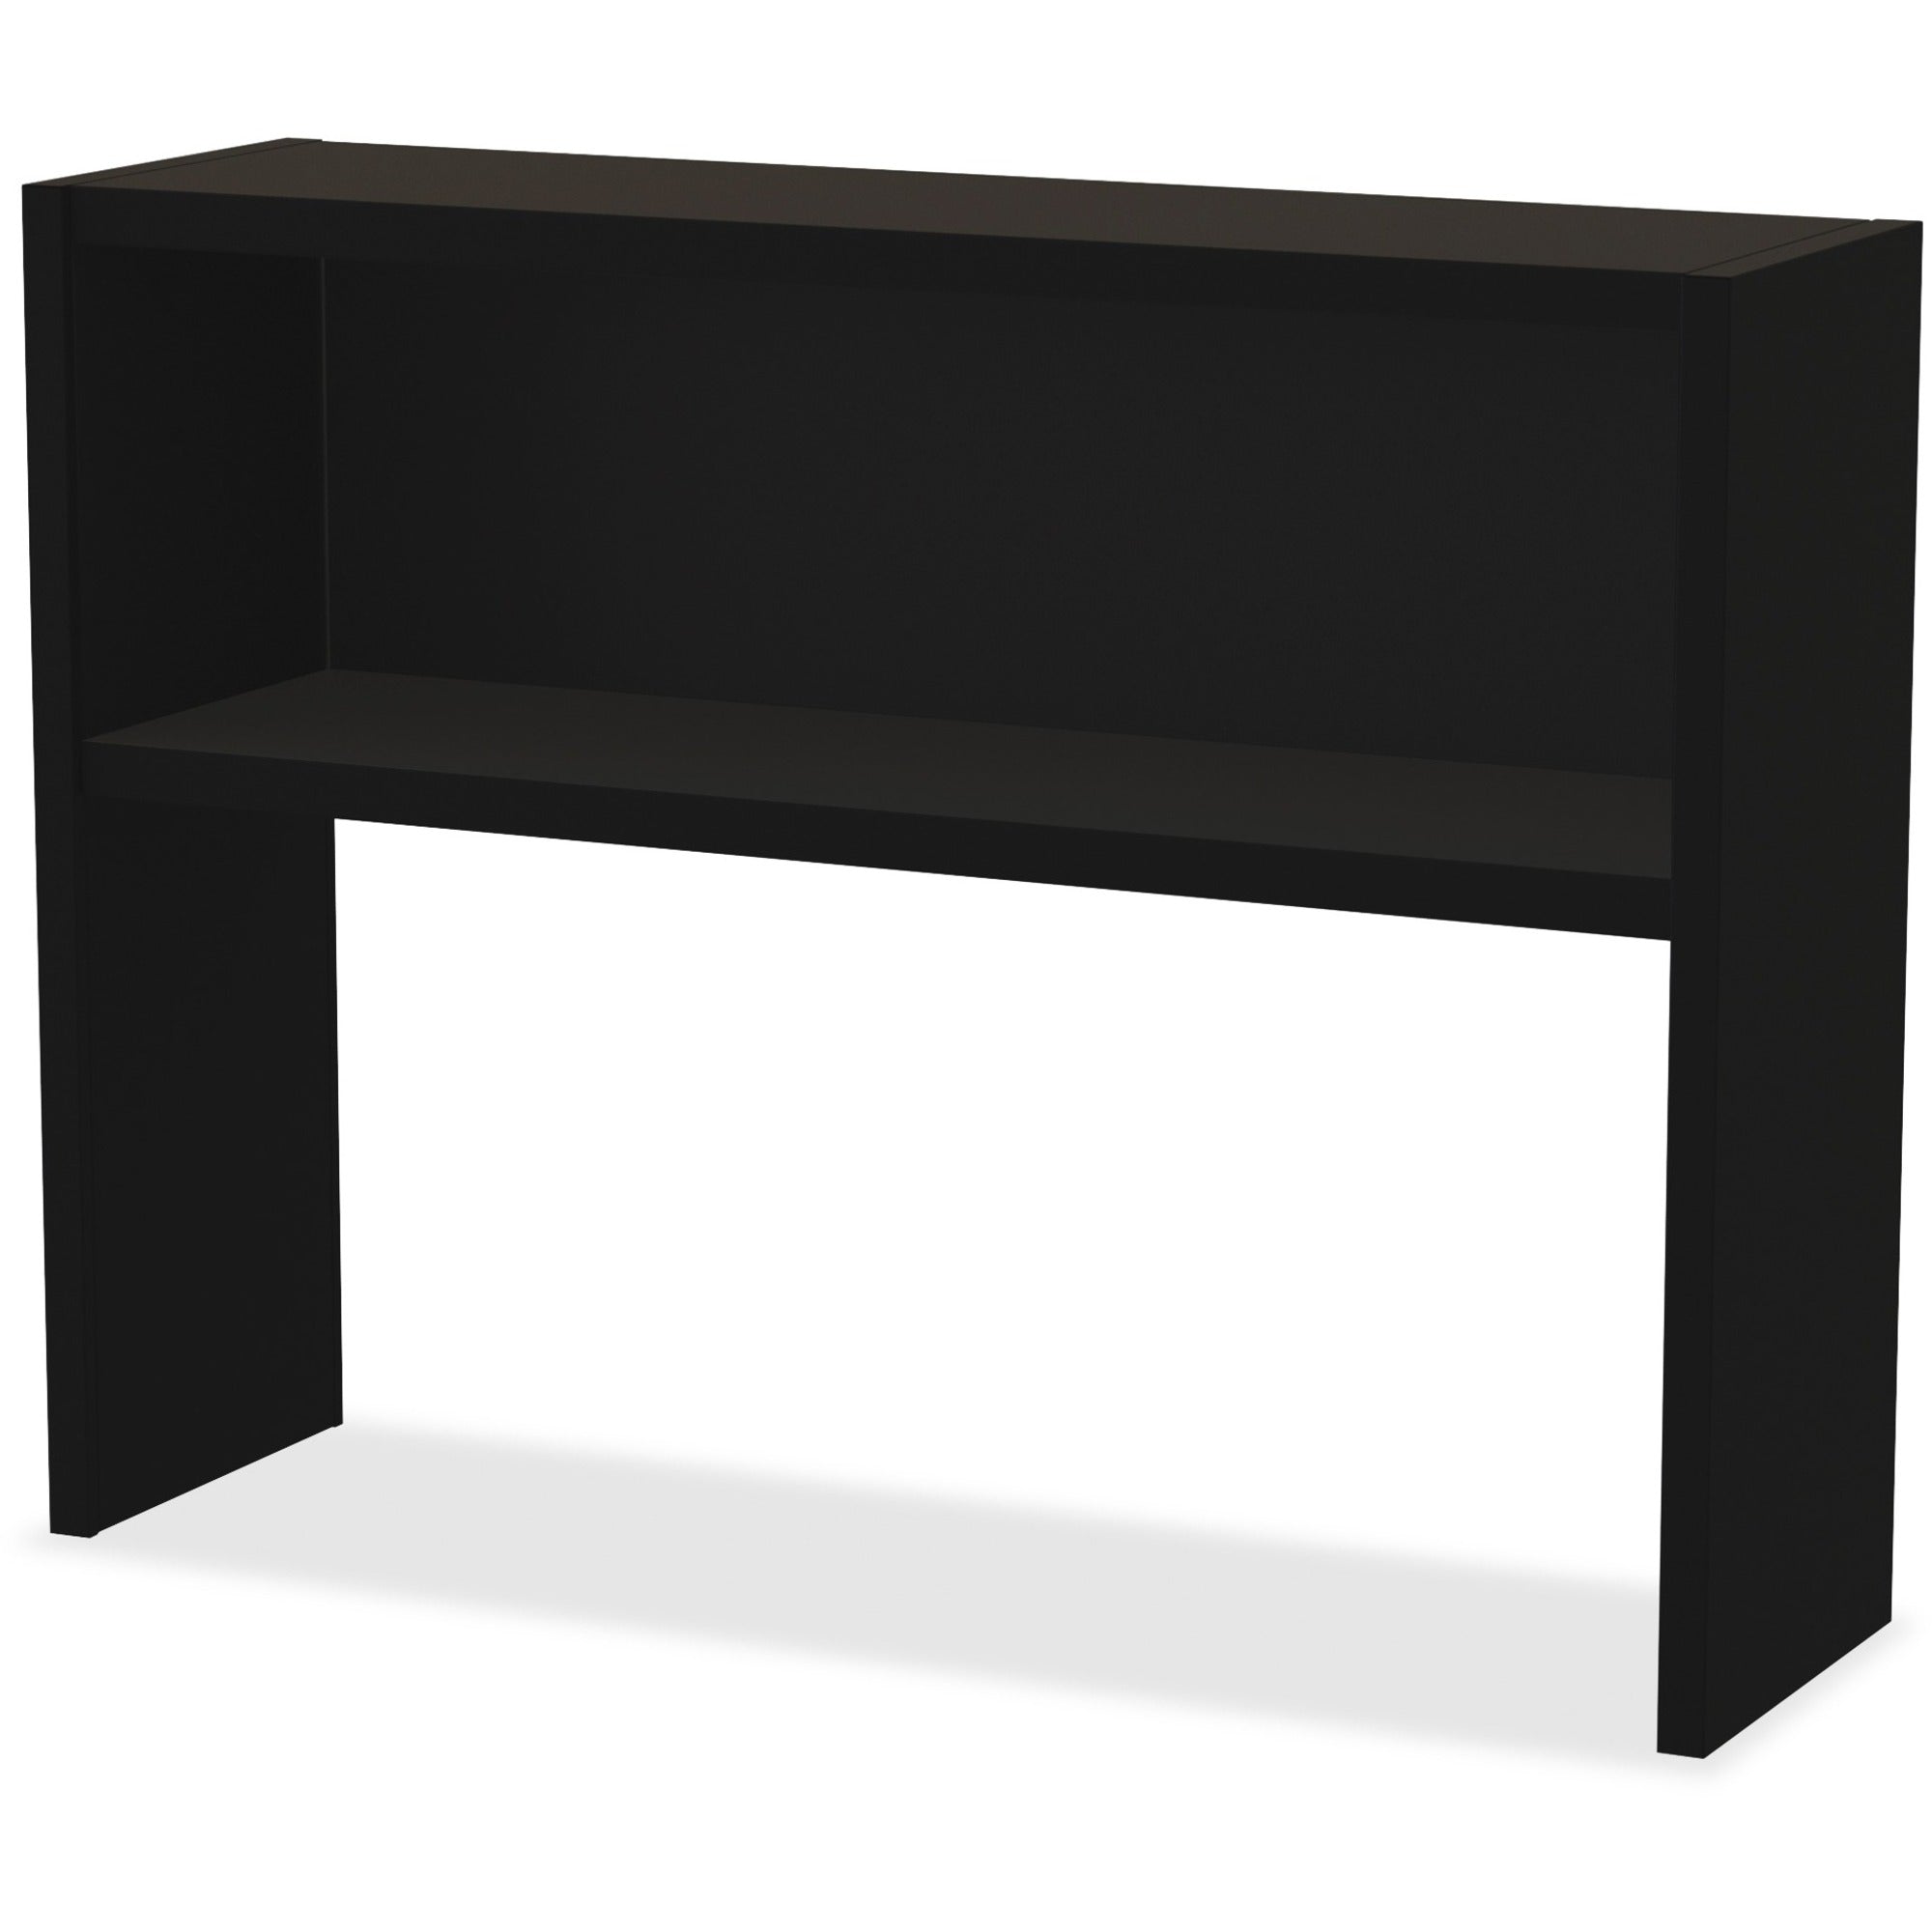 Lorell Fortress Modular Series Stack-on Hutch - 48" - Material: Steel - Finish: Black - Grommet, Cord Management - 